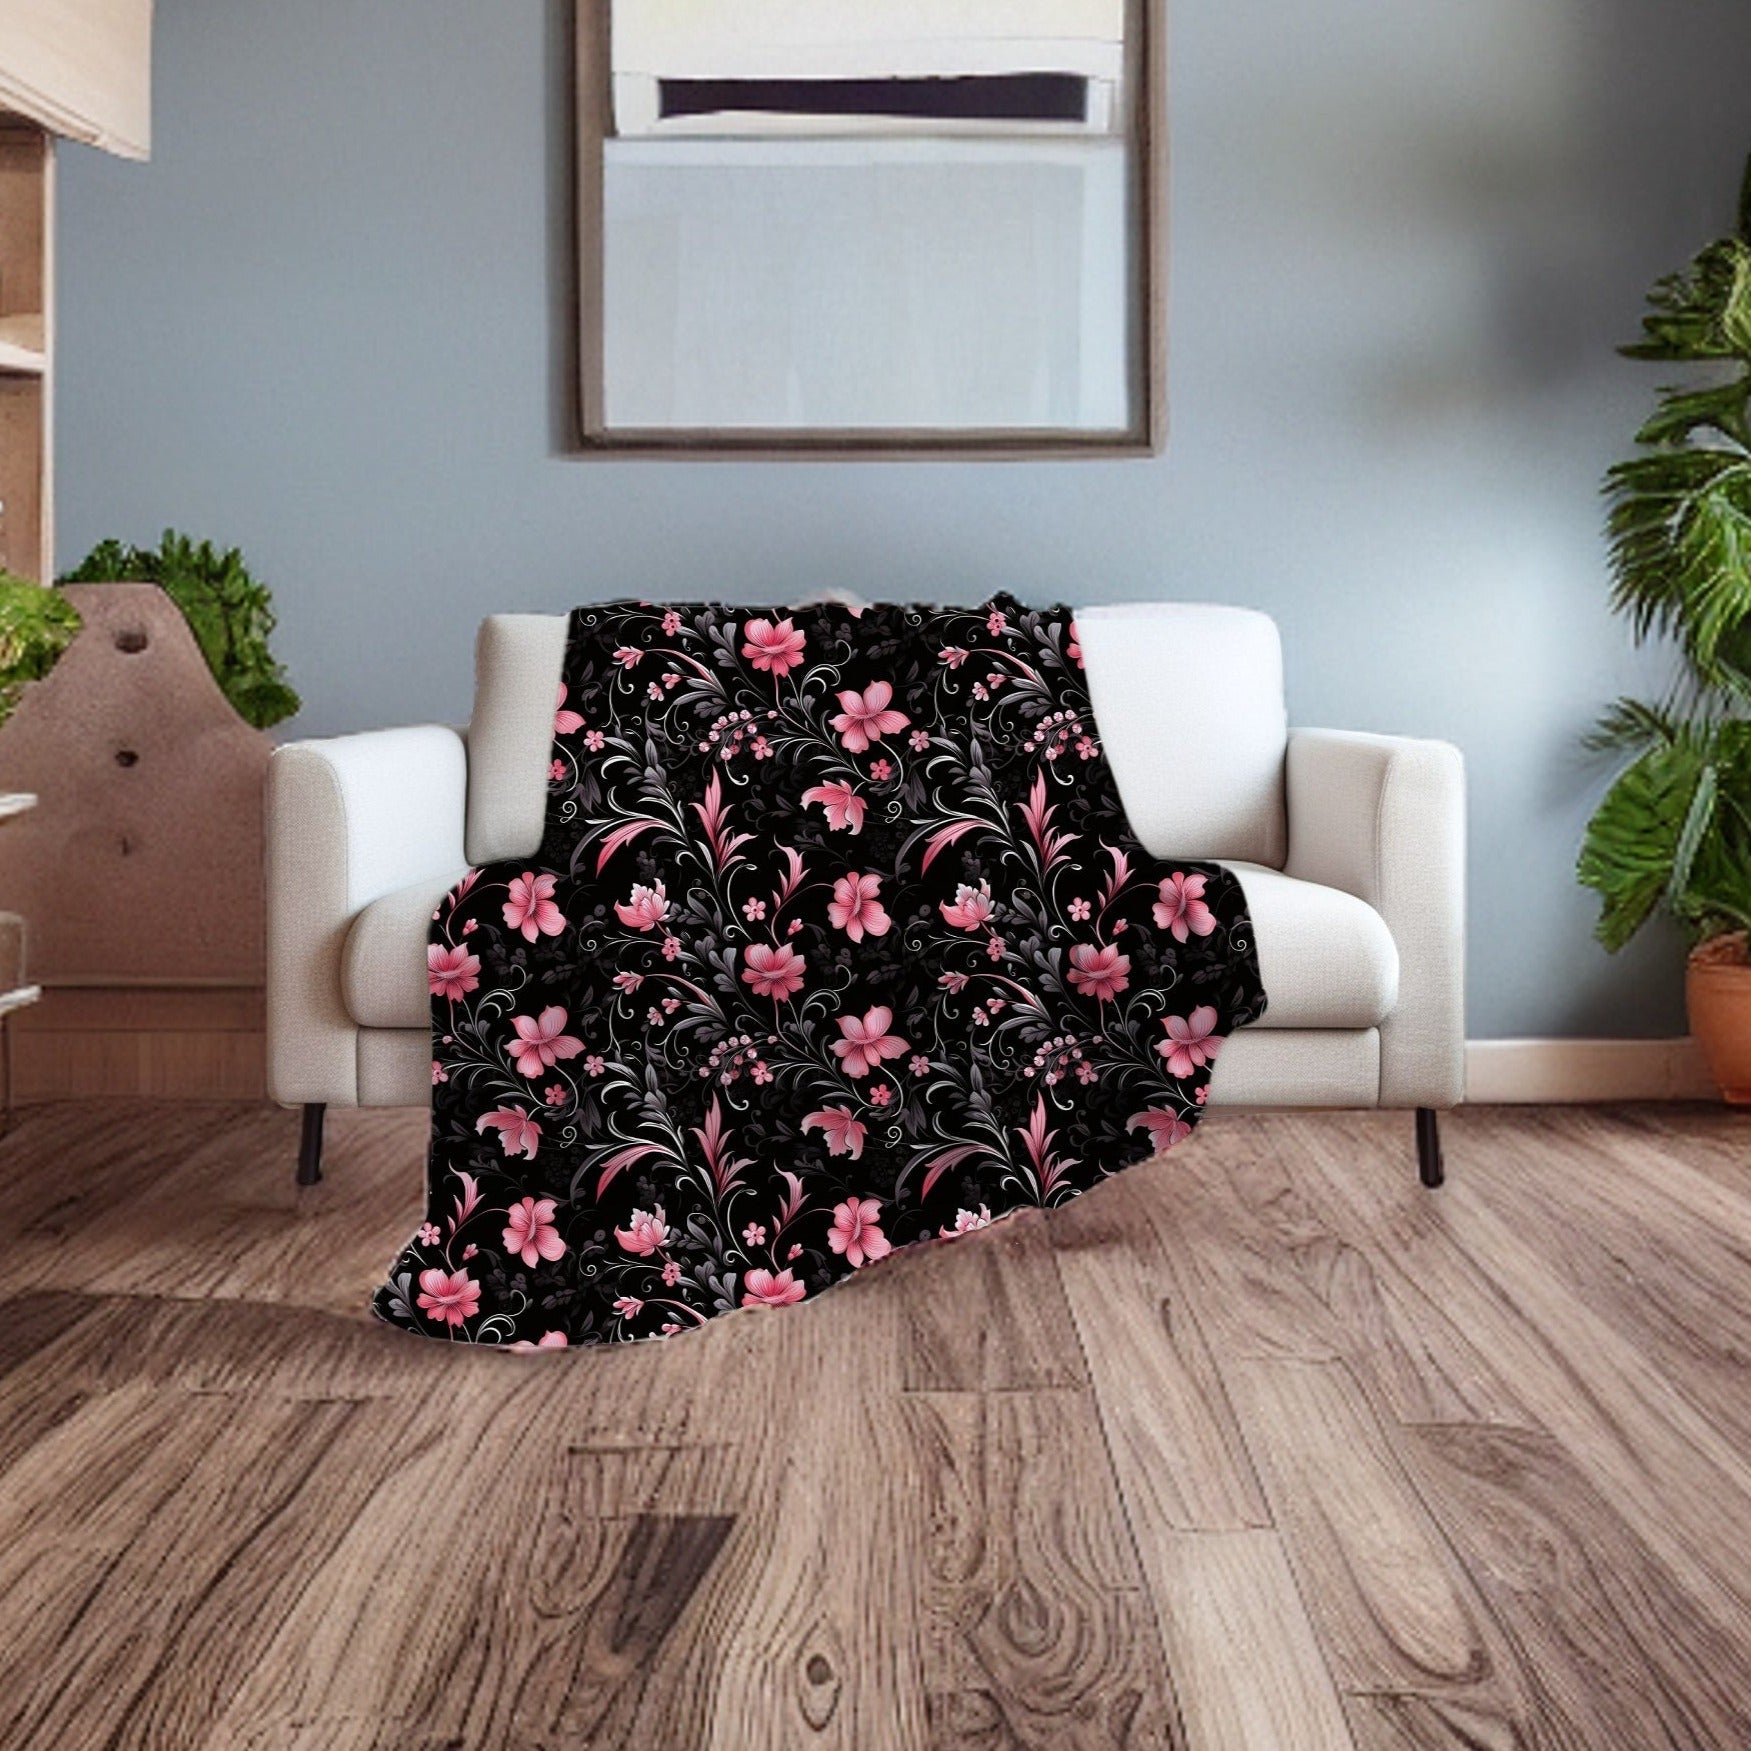 Pink Blossoms of Darkness Throw Blanket